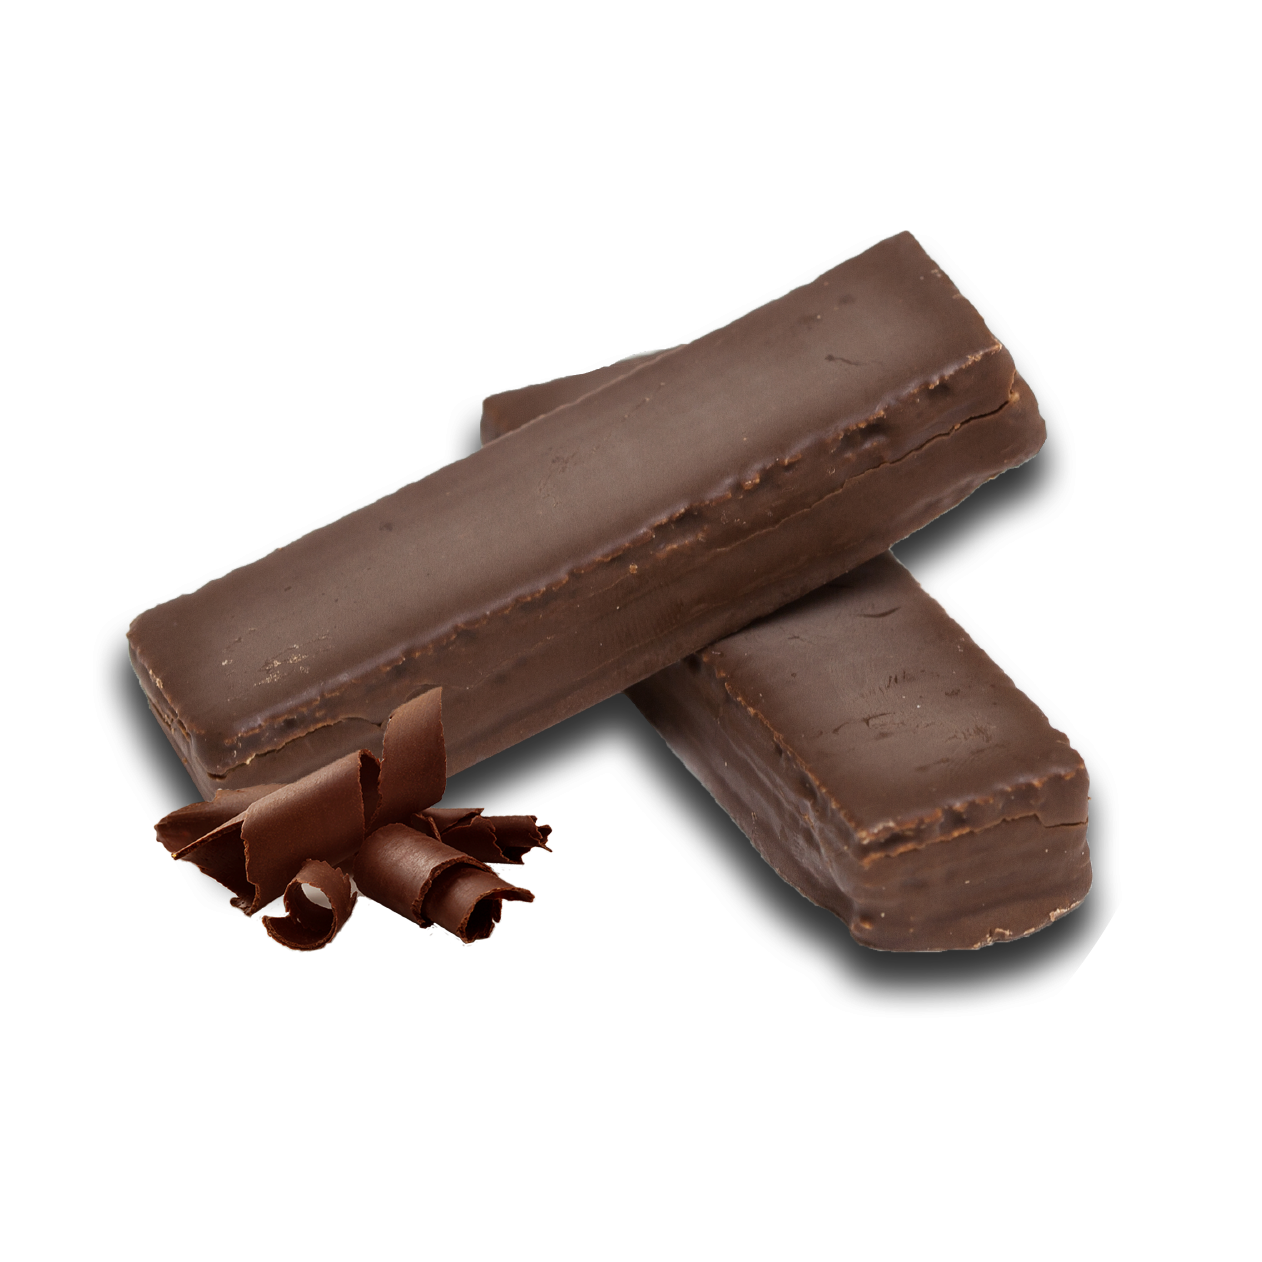 Double Chocolate Wafer Bar - 10g